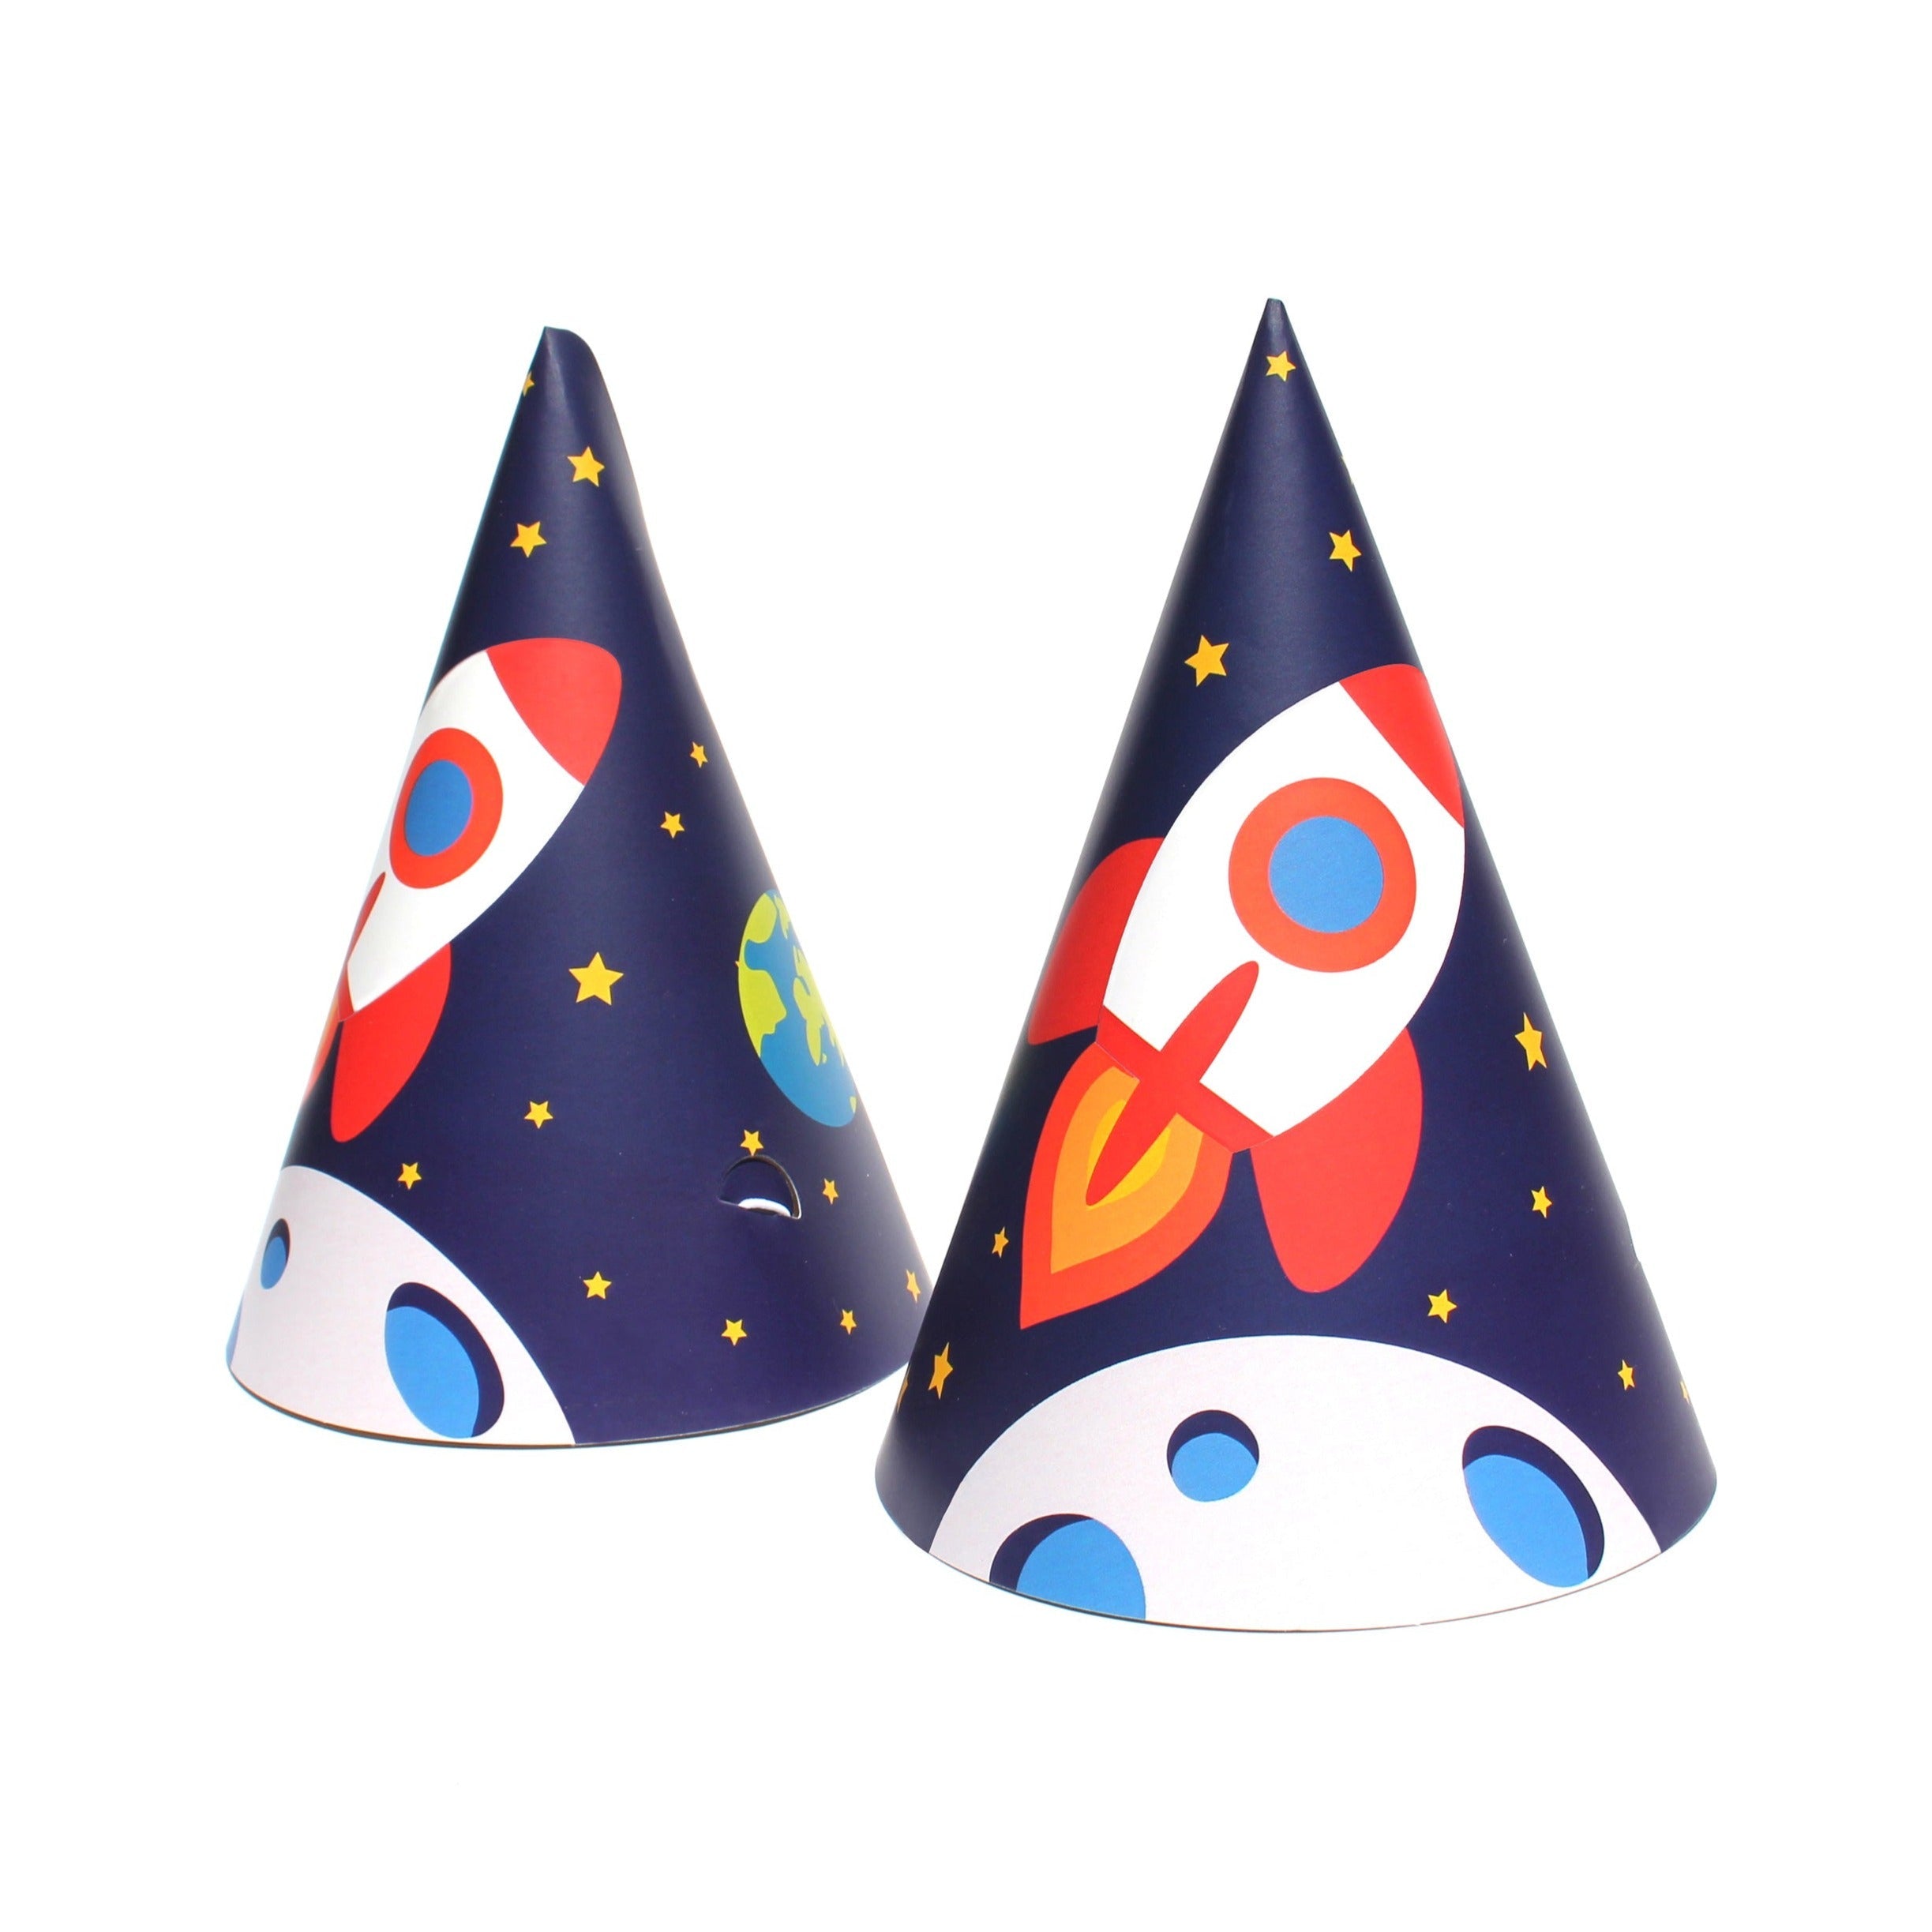 Space Party Hats, 12 Ct